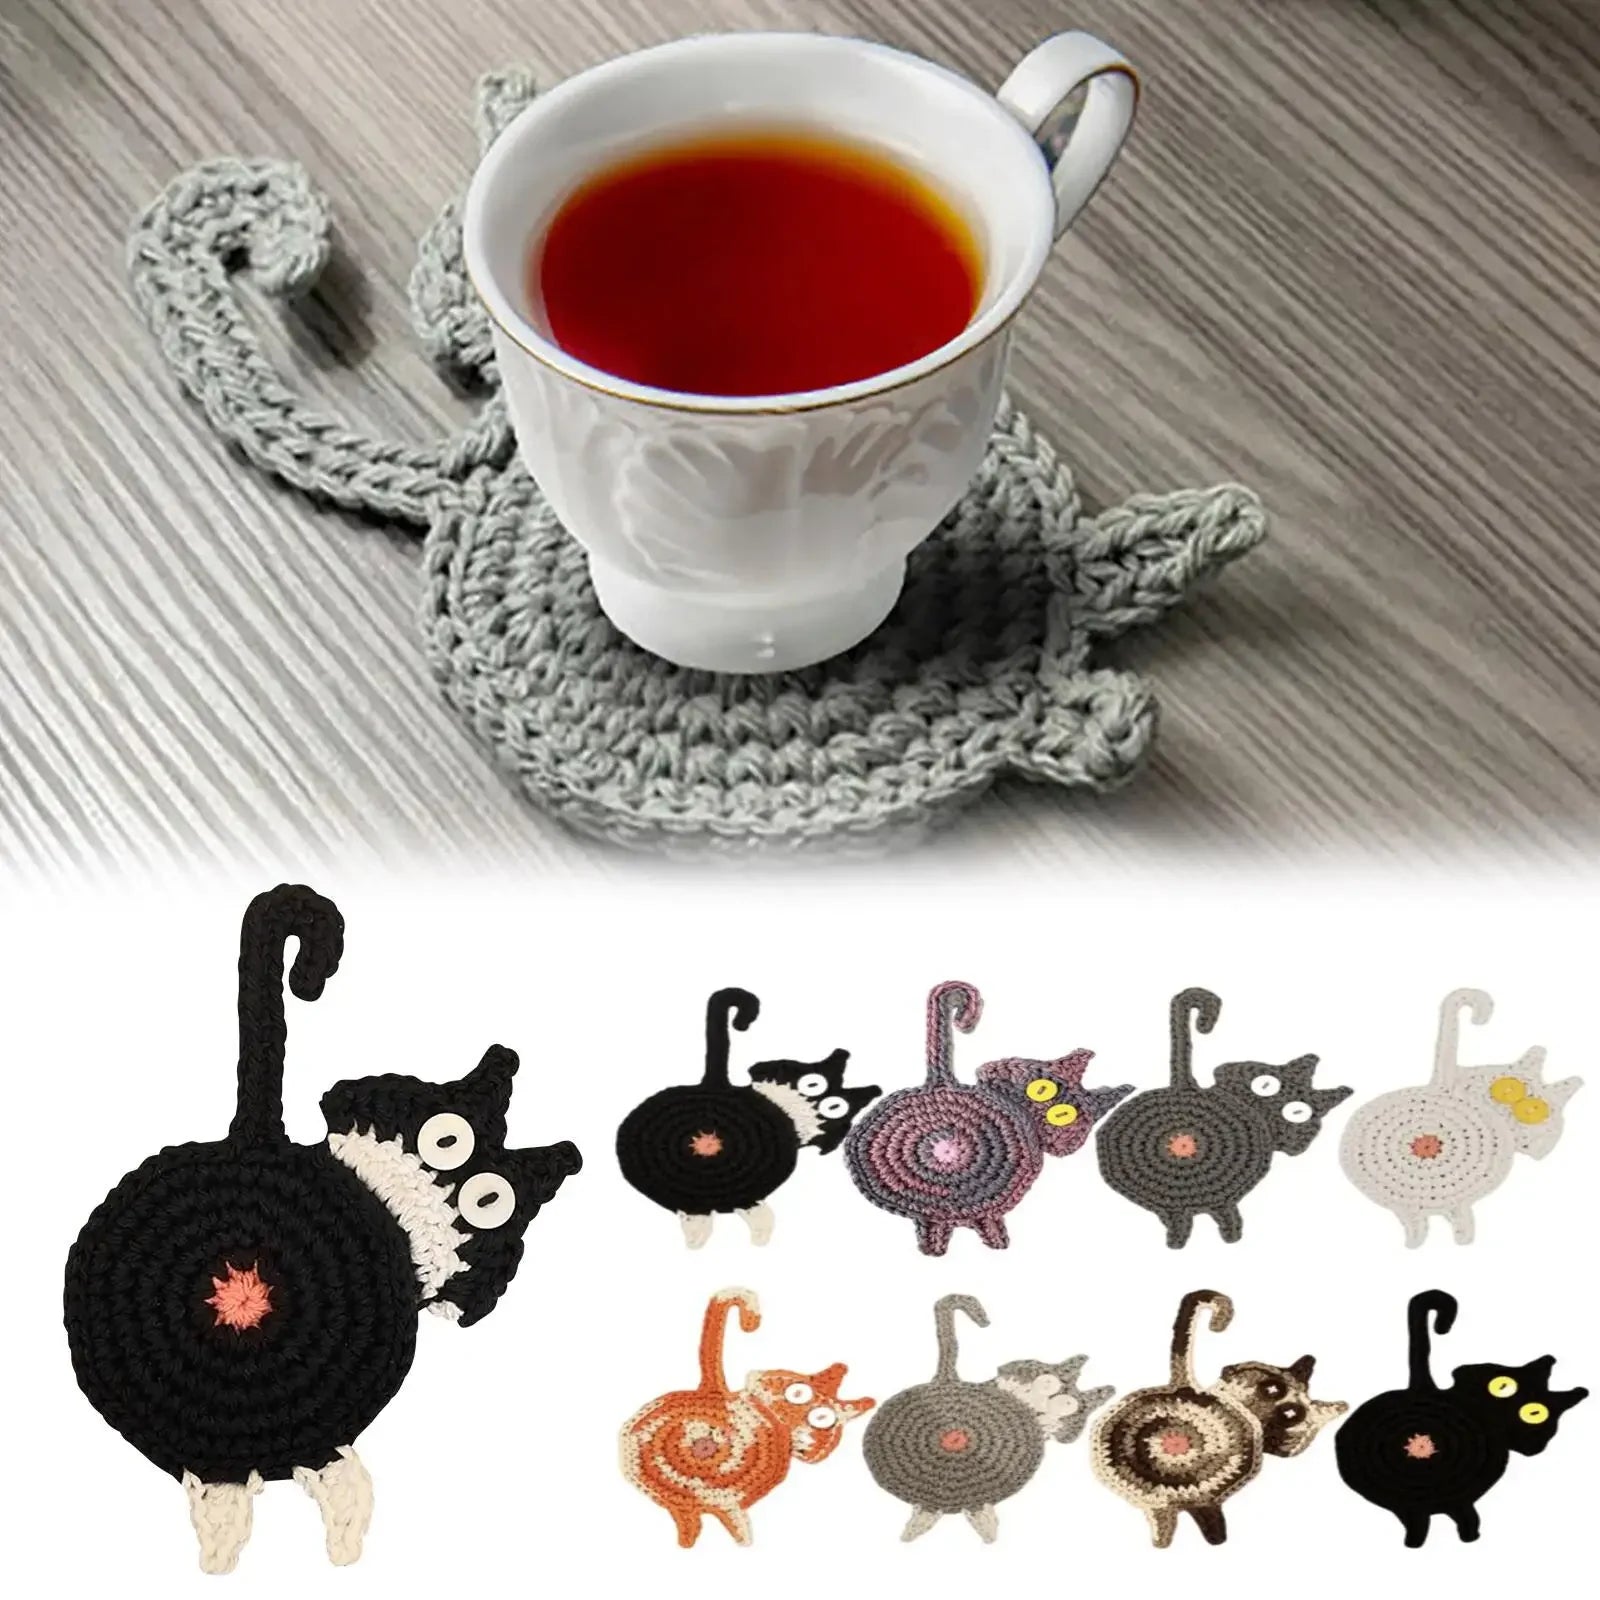 Cat Butt Coaster Tea Coffee Cup Coaster Placemats Durable Heat Resistant Coasters Bowl Pad Table Mat Home Decoration posavasos